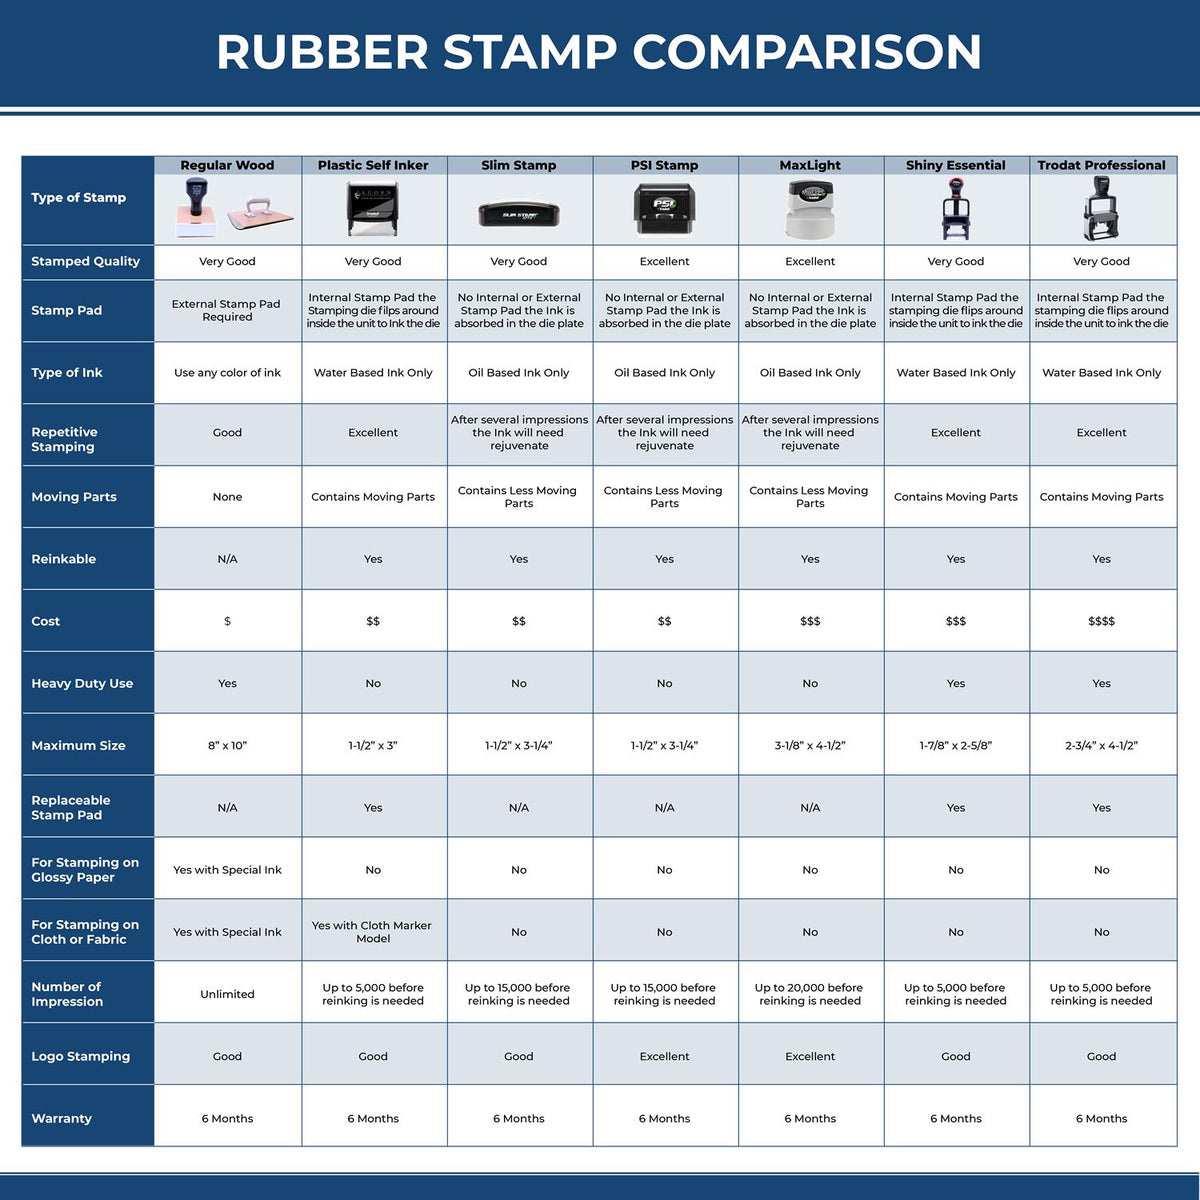 Large Self Inking Attorneys Copy Stamp 4596S Rubber Stamp Comparison